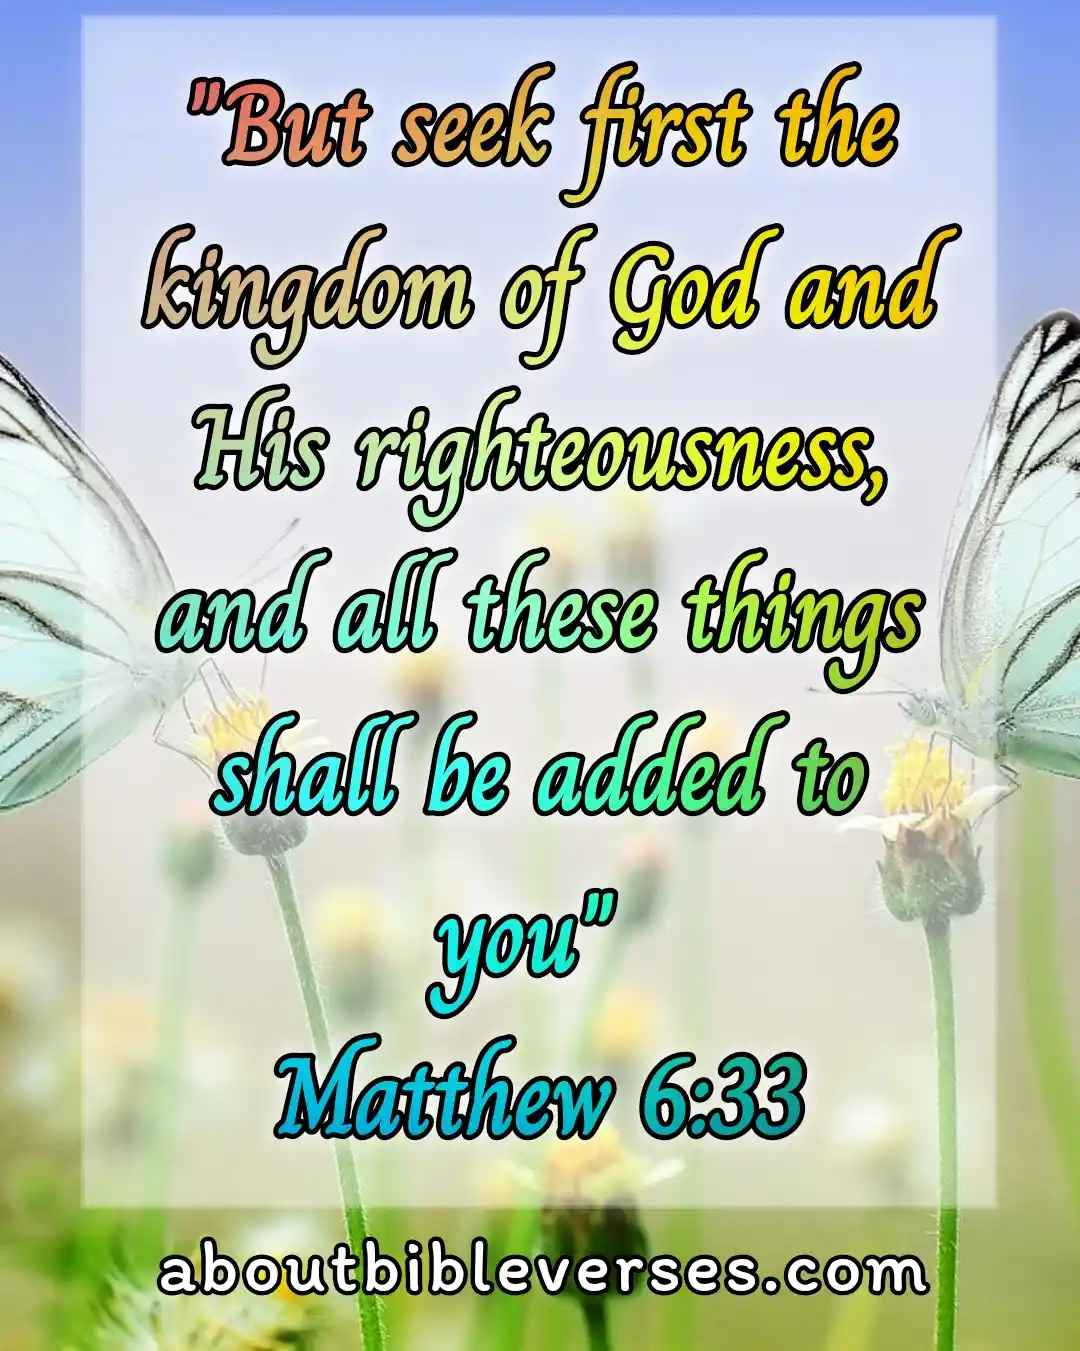 Bible Verses About Health And Wellness (Matthew 6:33)